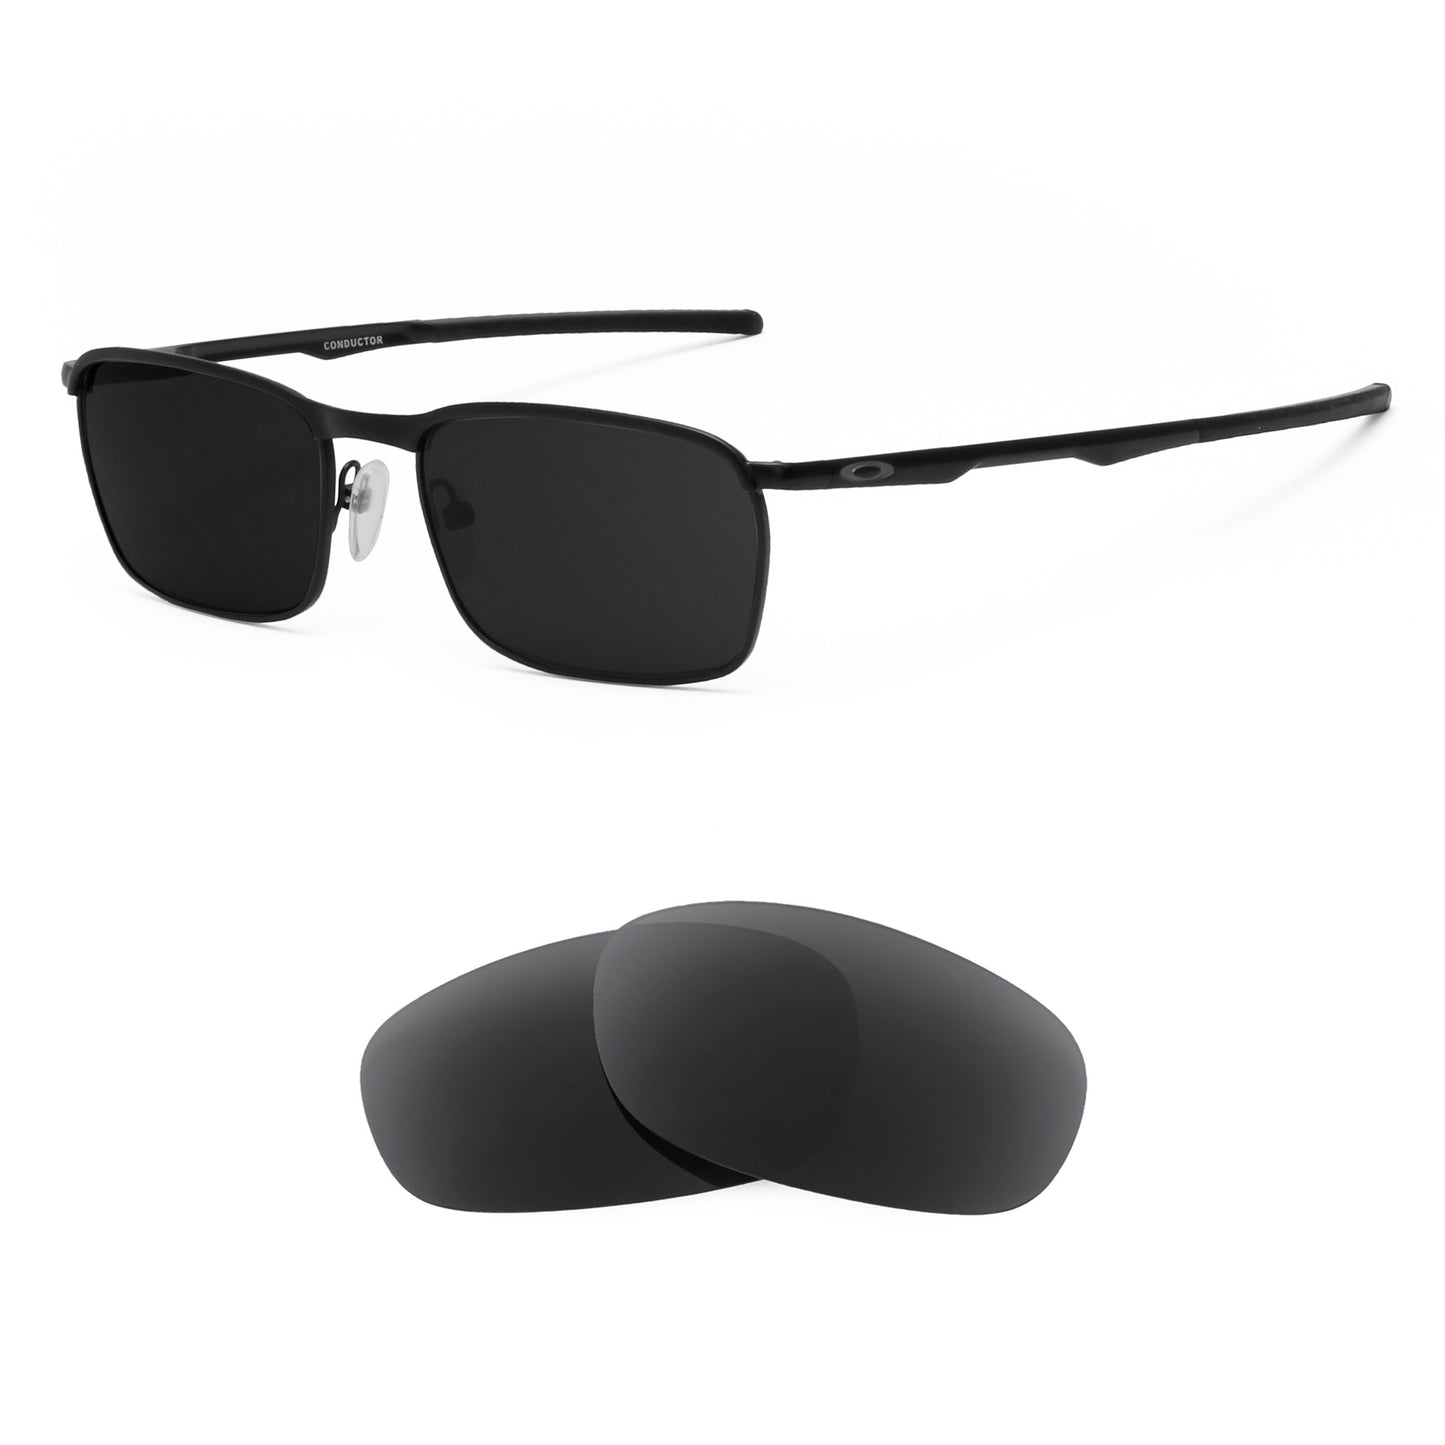 Oakley Conductor Rx sunglasses with replacement lenses